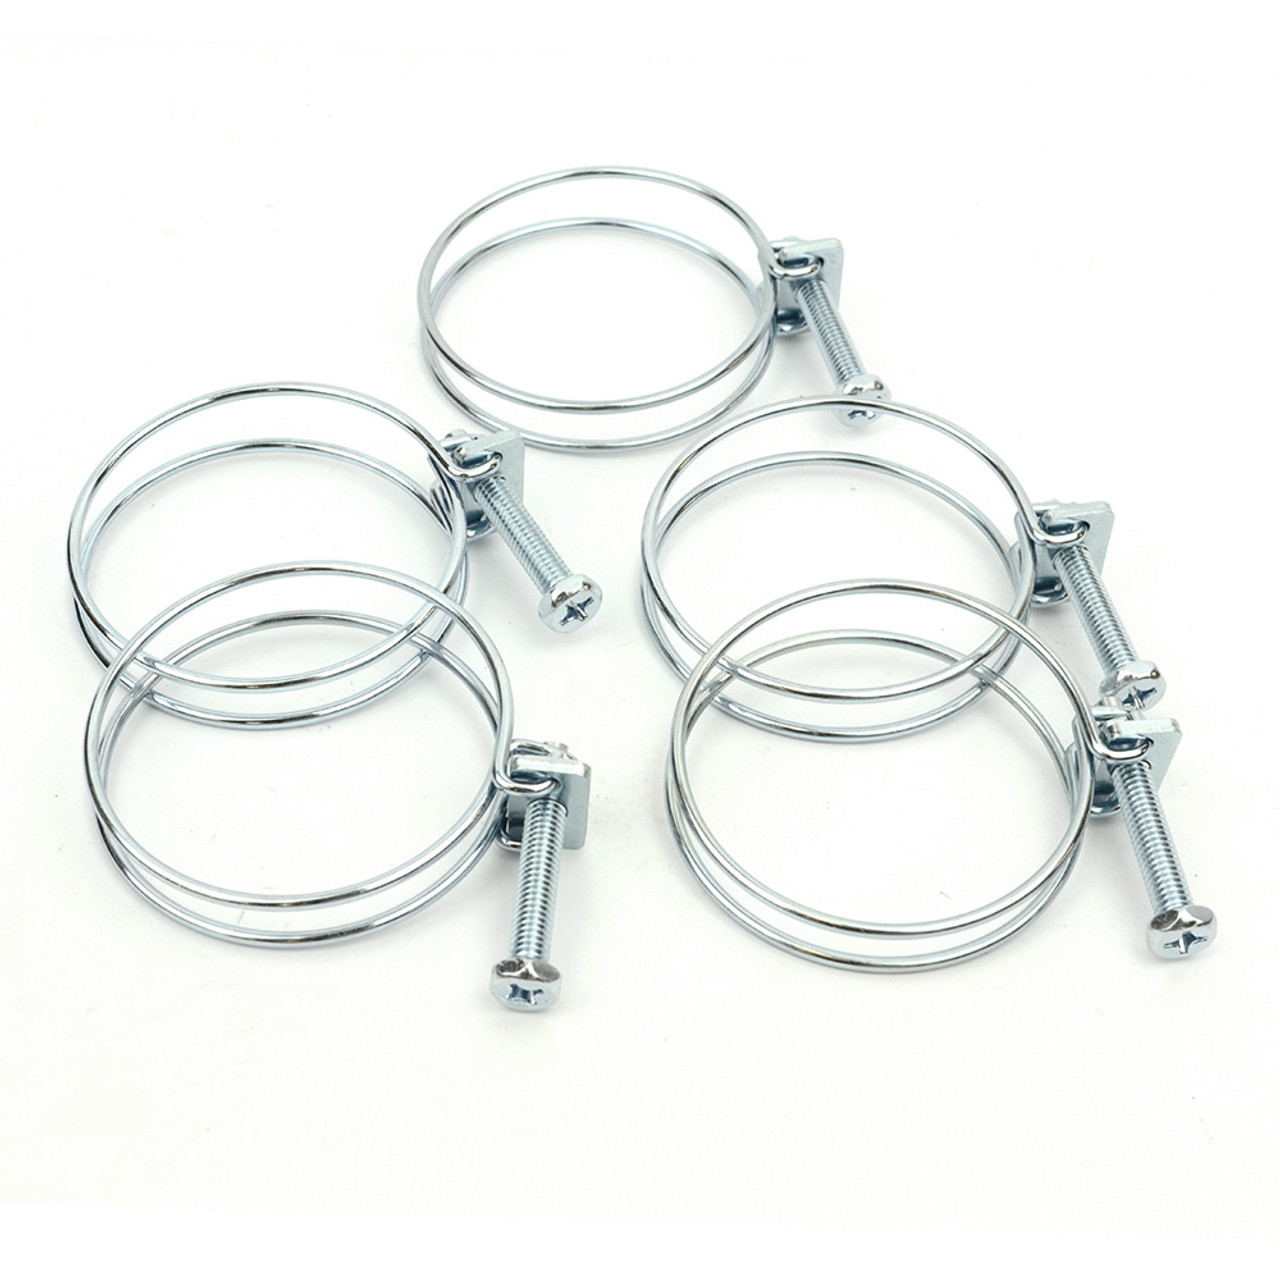 Big Horn 5 Pack 2-1/2 Inch Wire Hose Clamp 11725PK